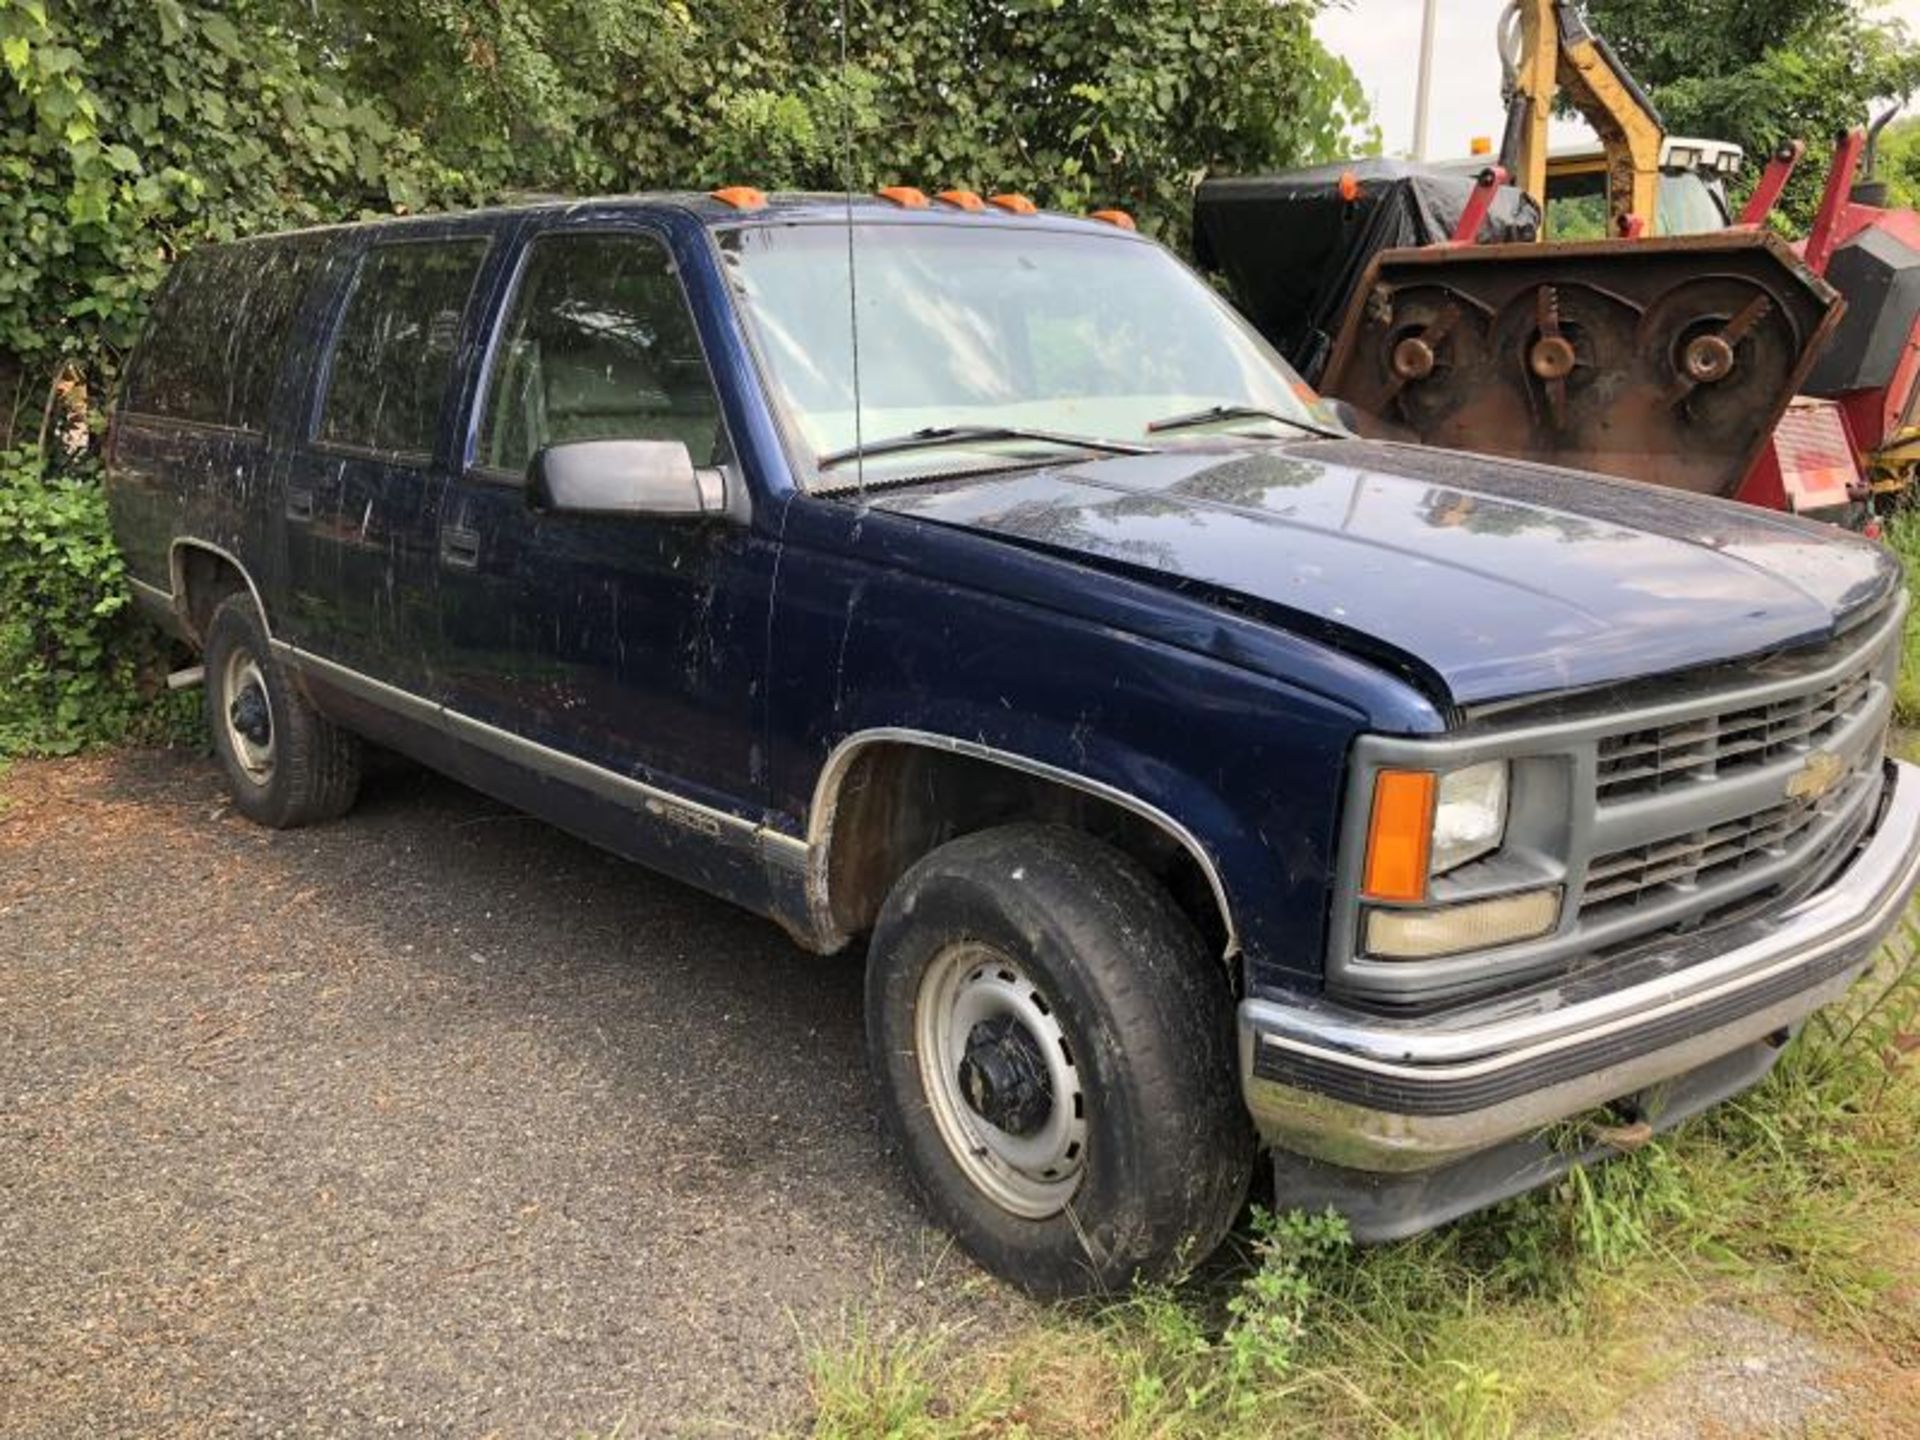 1997 Chevrolet 1500 Suburban, VIN# 3GNFK16R1NG137605, Blue, 122375 Miles, Rough - Rotted - Image 2 of 2